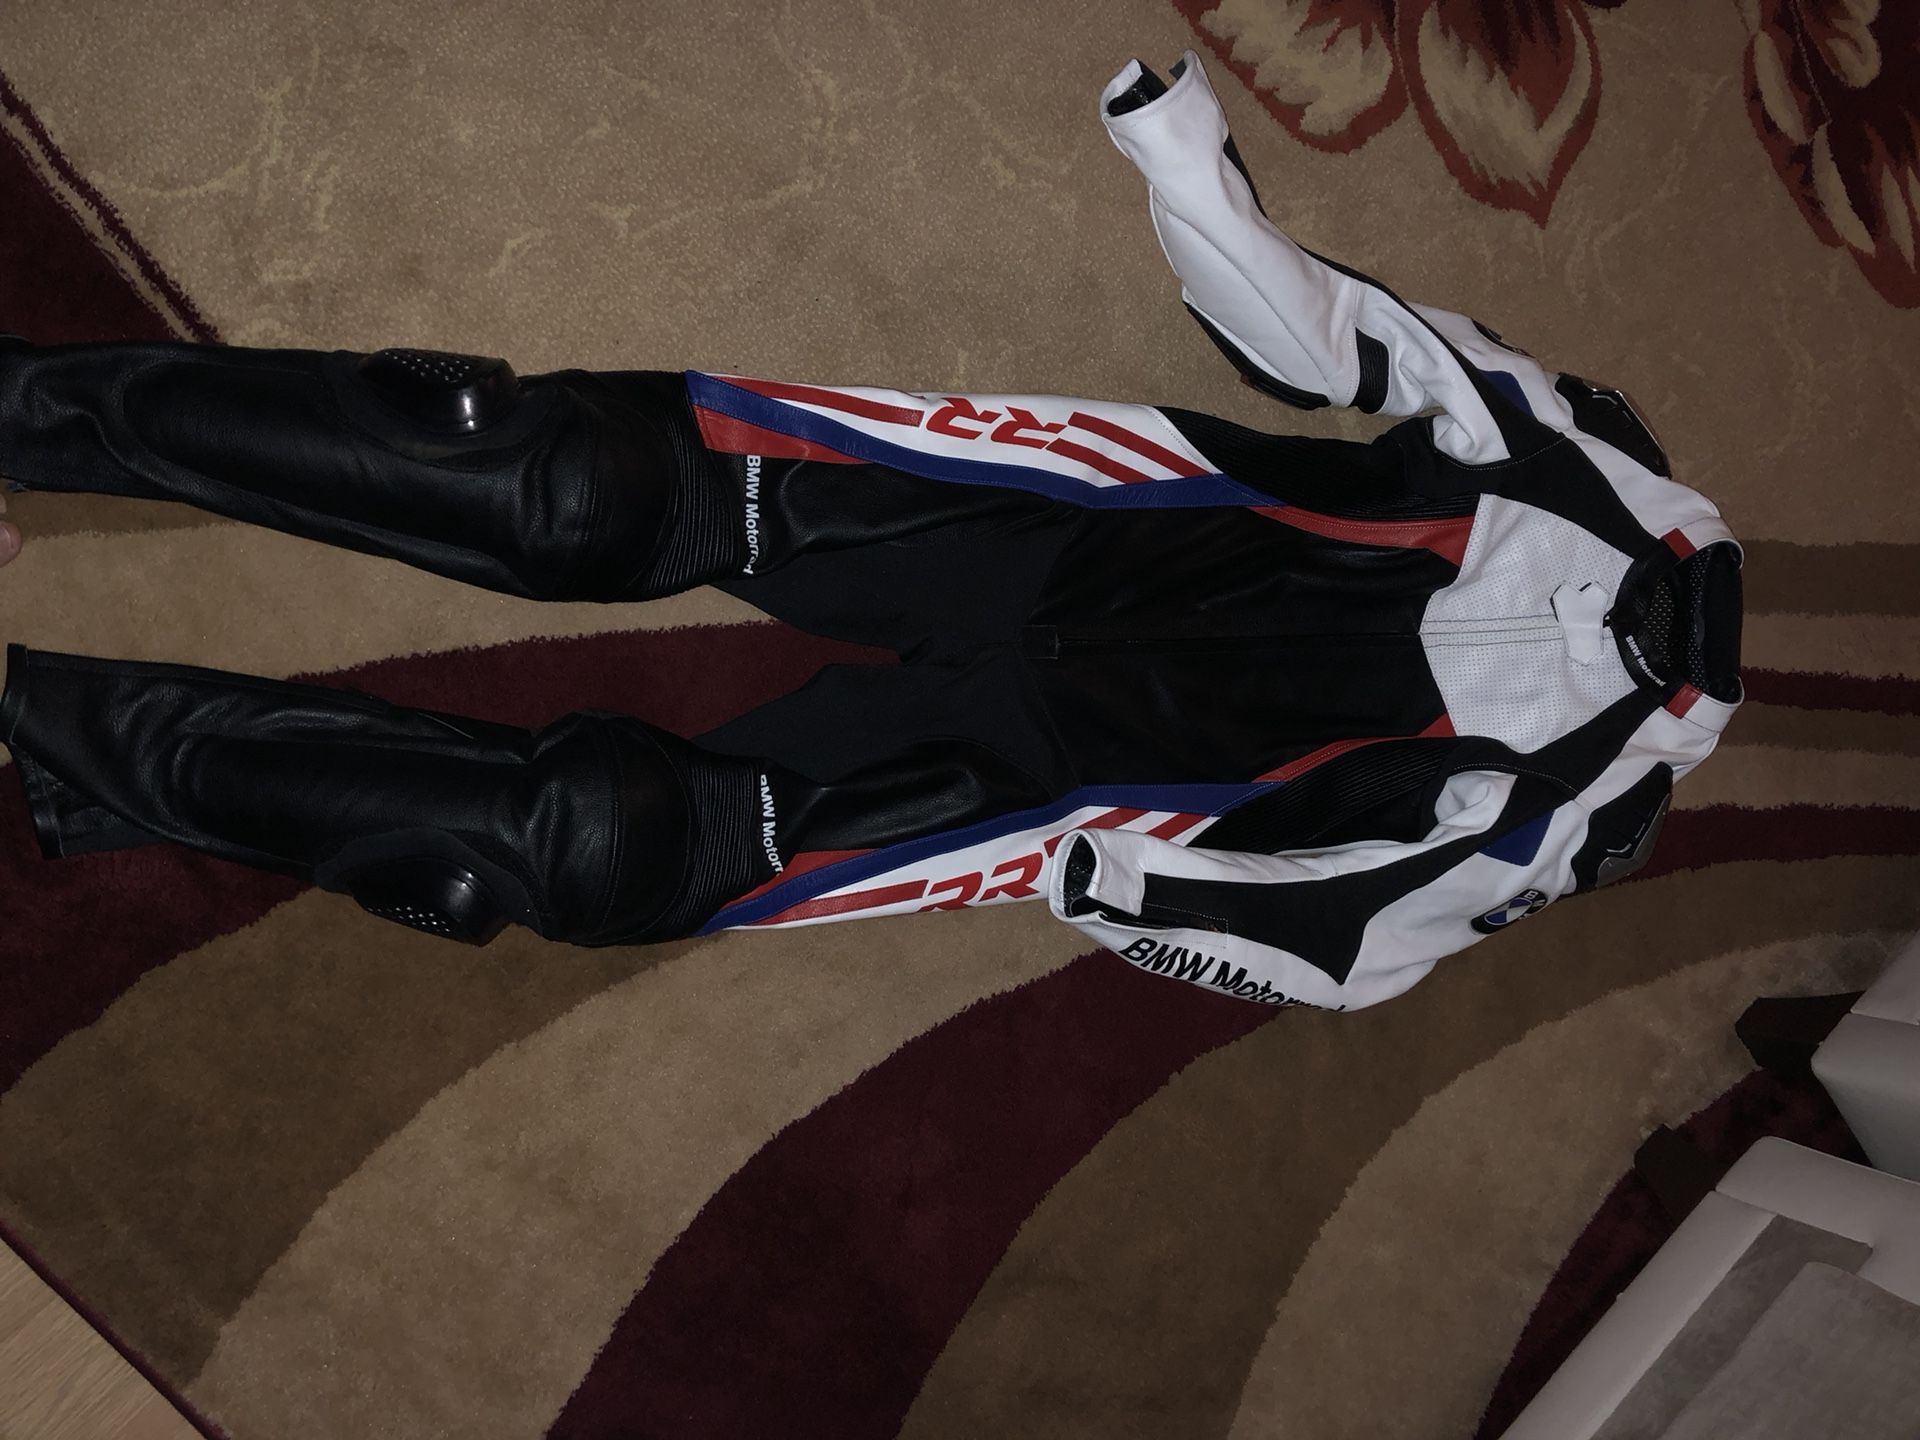 BMW WHITE AND BLACK MOTORBIKE / MOTORCYCLE RACING LEATHER SUIT FULL PROTECTION